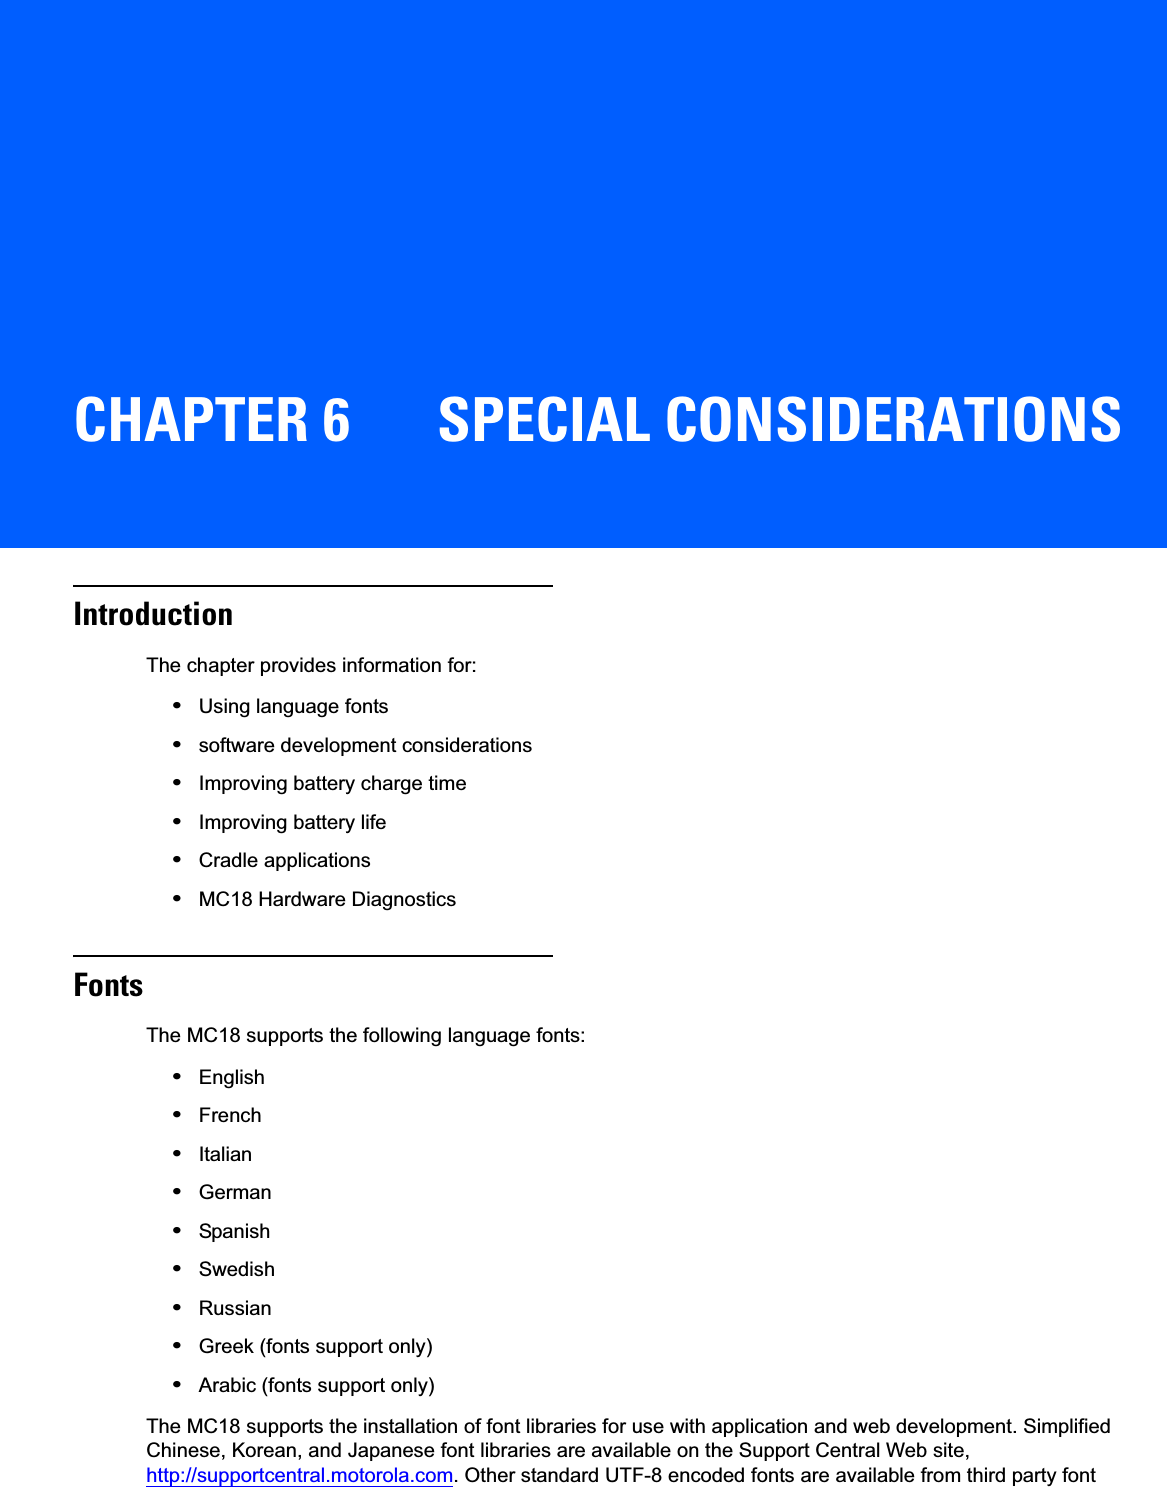 CHAPTER 6 SPECIAL CONSIDERATIONSIntroductionThe chapter provides information for:•Using language fonts•software development considerations•Improving battery charge time•Improving battery life•Cradle applications•MC18 Hardware DiagnosticsFontsThe MC18 supports the following language fonts:•English•French•Italian•German•Spanish•Swedish•Russian•Greek (fonts support only)•Arabic (fonts support only)The MC18 supports the installation of font libraries for use with application and web development. Simplified Chinese, Korean, and Japanese font libraries are available on the Support Central Web site, http://supportcentral.motorola.com. Other standard UTF-8 encoded fonts are available from third party font 